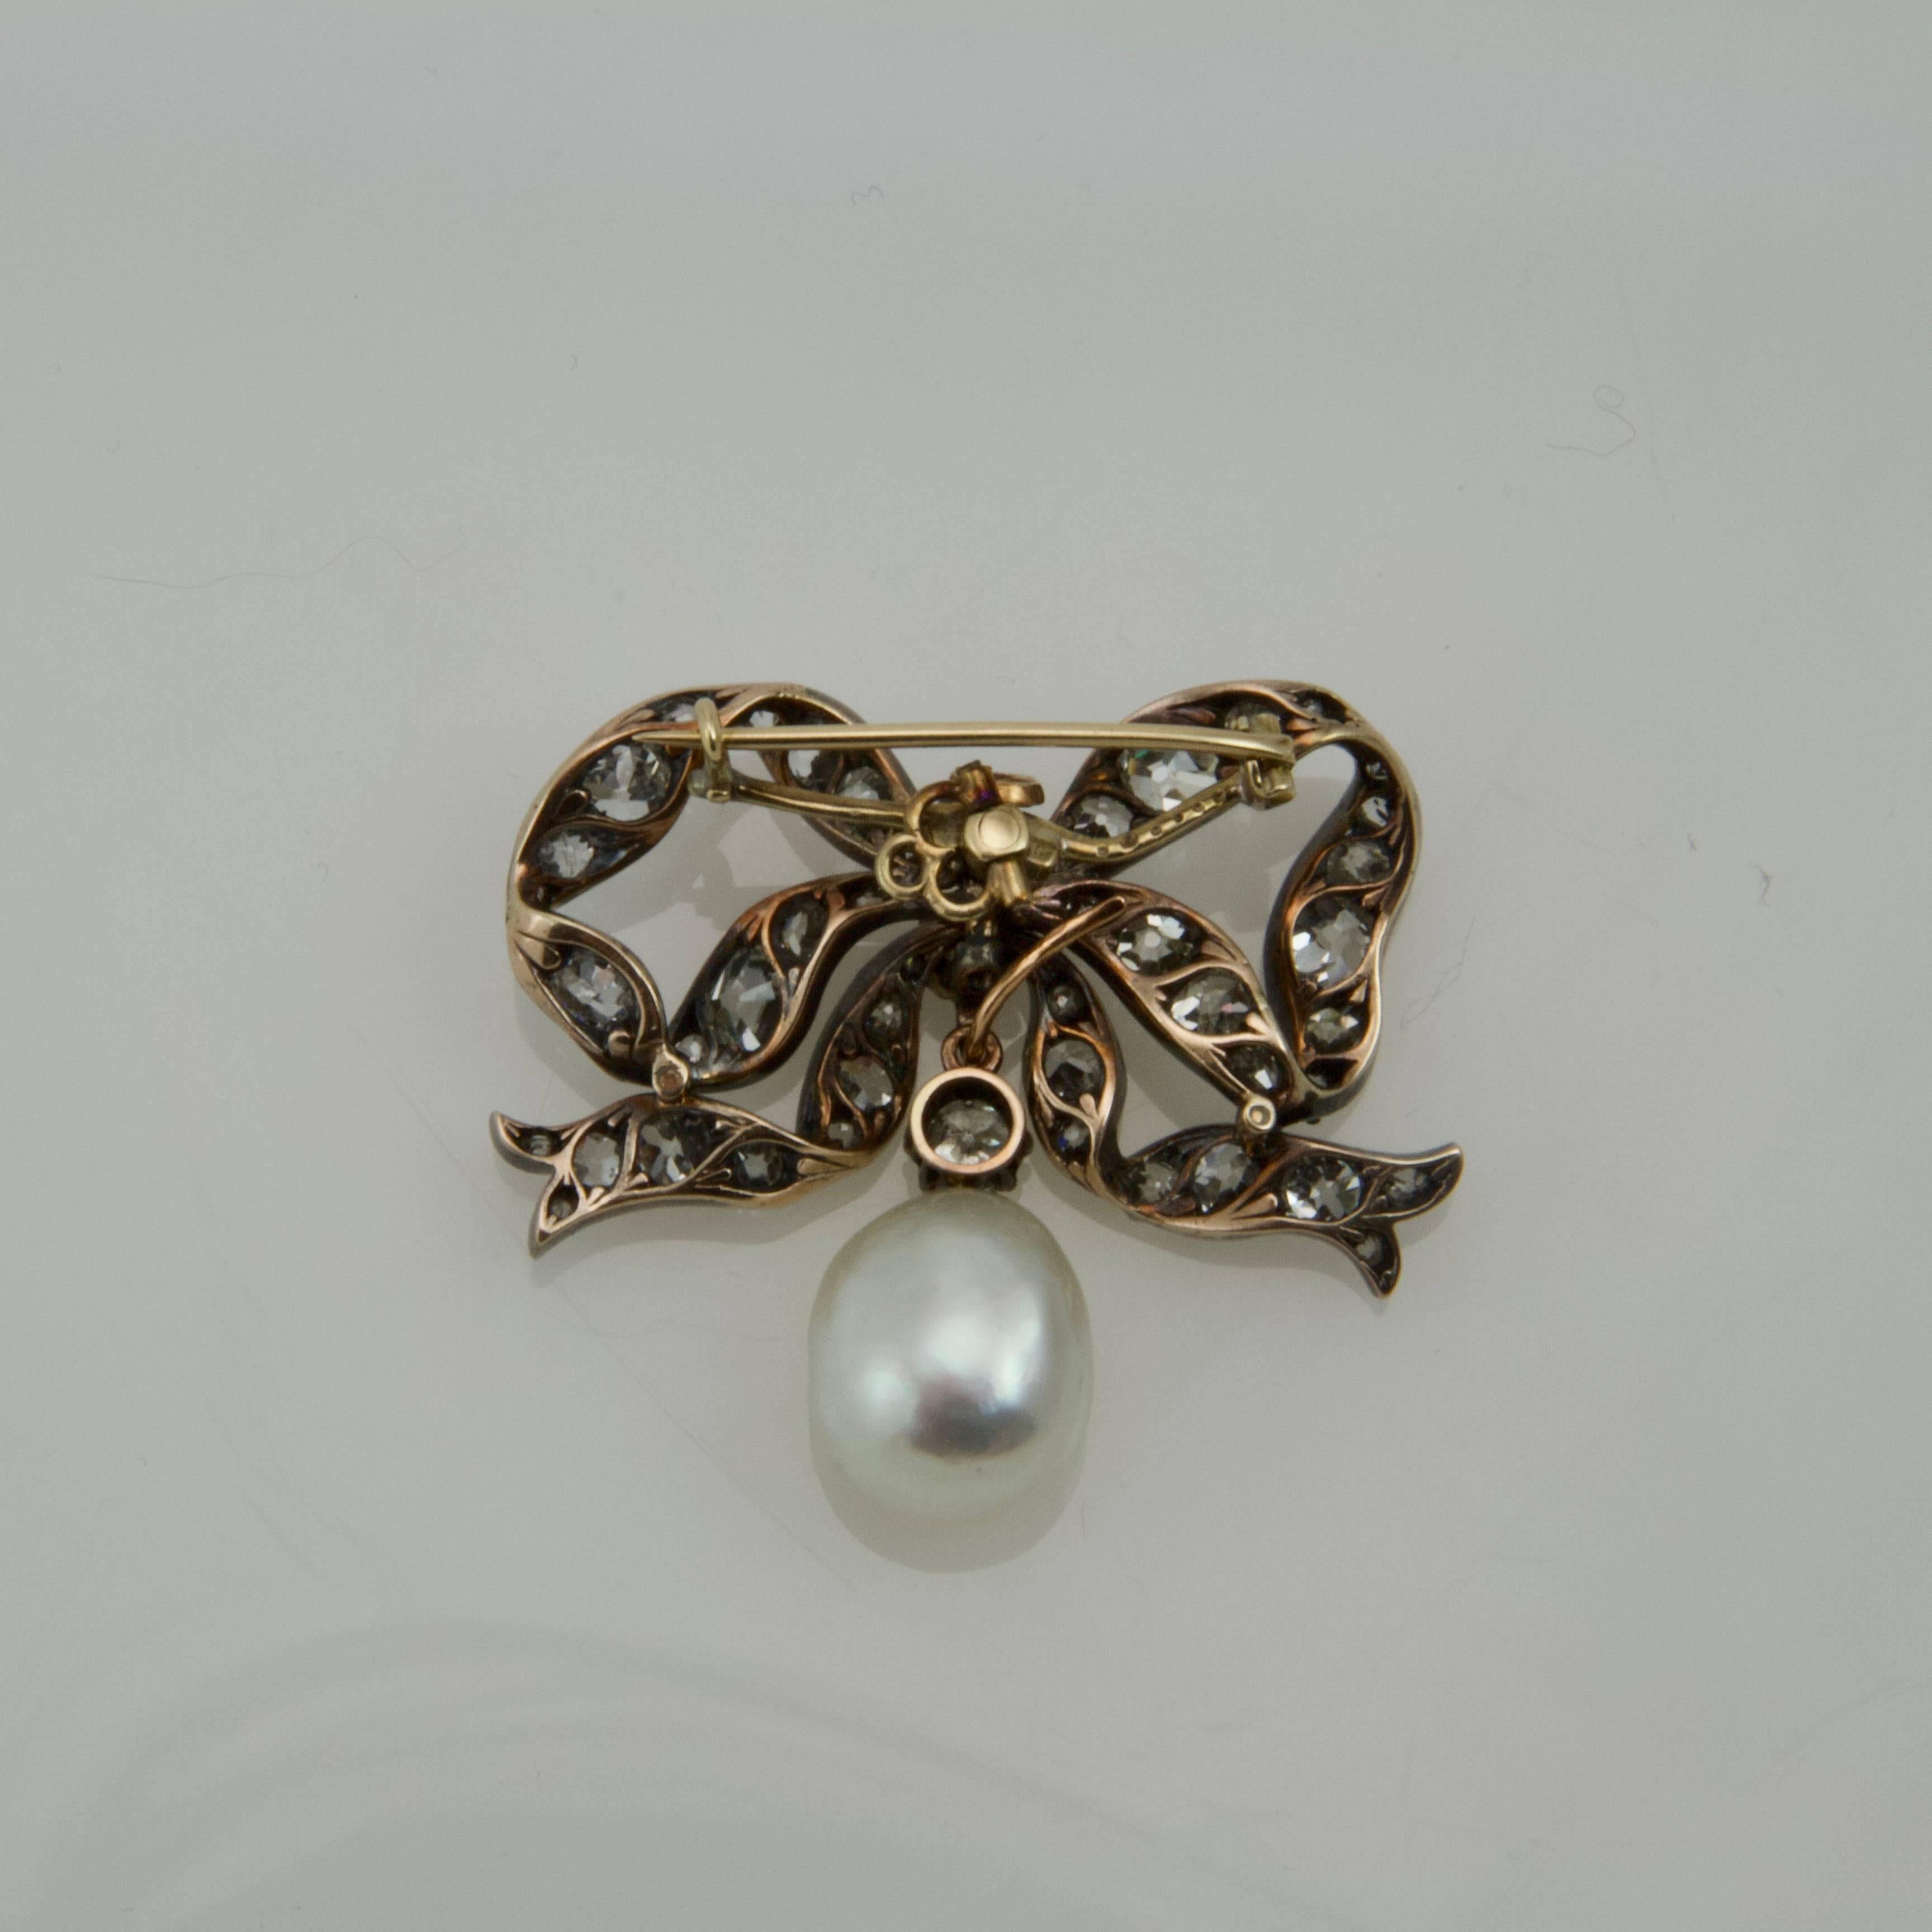 Antique-cut diamond set on gold and silver bow brooch. Removable pear-shaped cultured pearl. 
Possible to wear in pendant. (brooch system removable)
Weight of antique cut diamonds almost 5 carats. Quality fair. 
Pearl size: 1.2 x 1.5 cm
Weight: 16.1